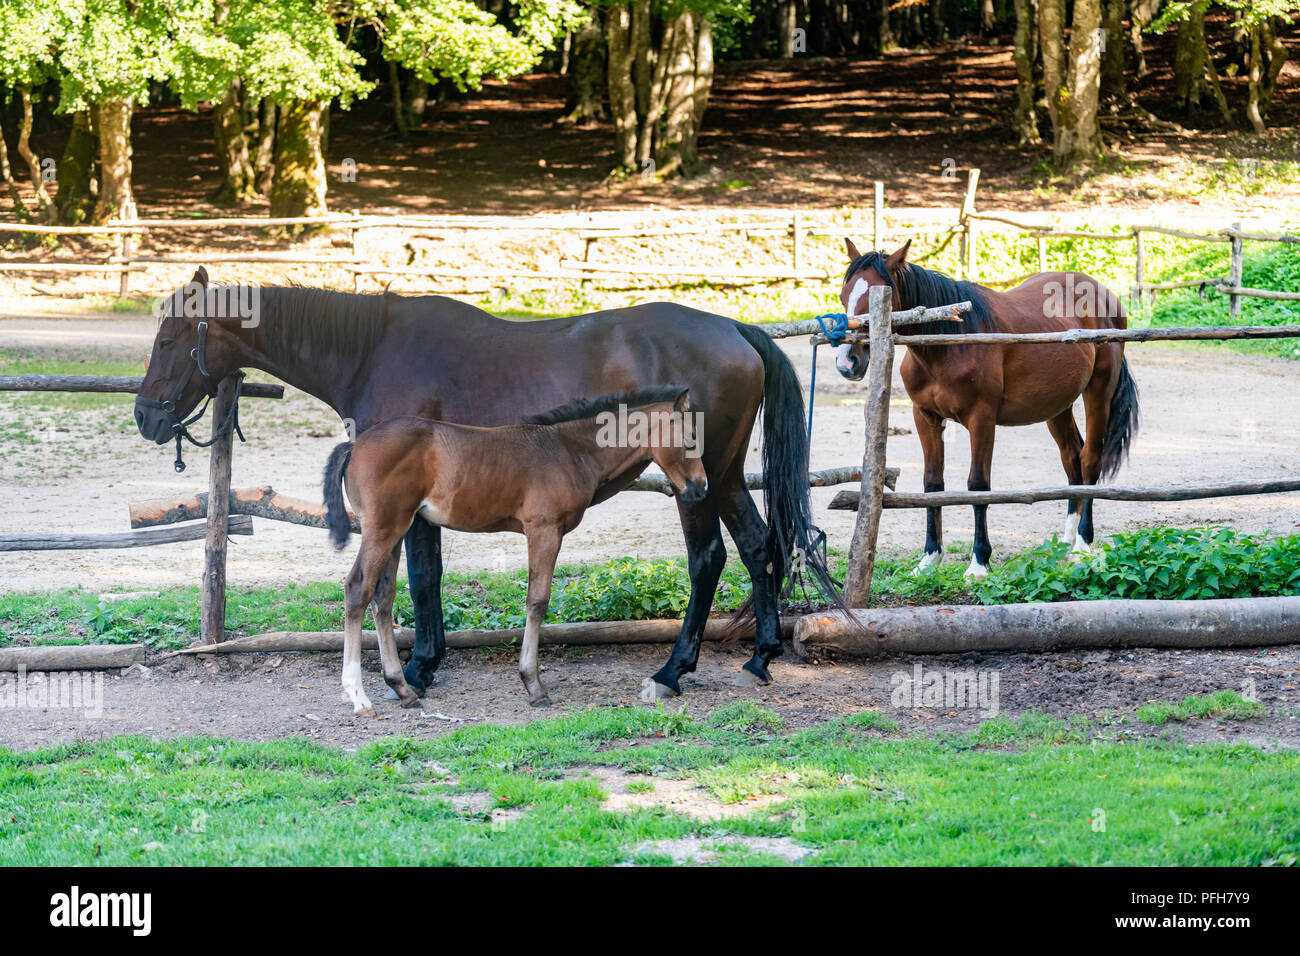 Three horses in stables two adults and one colt tranquil scene Stock Photo